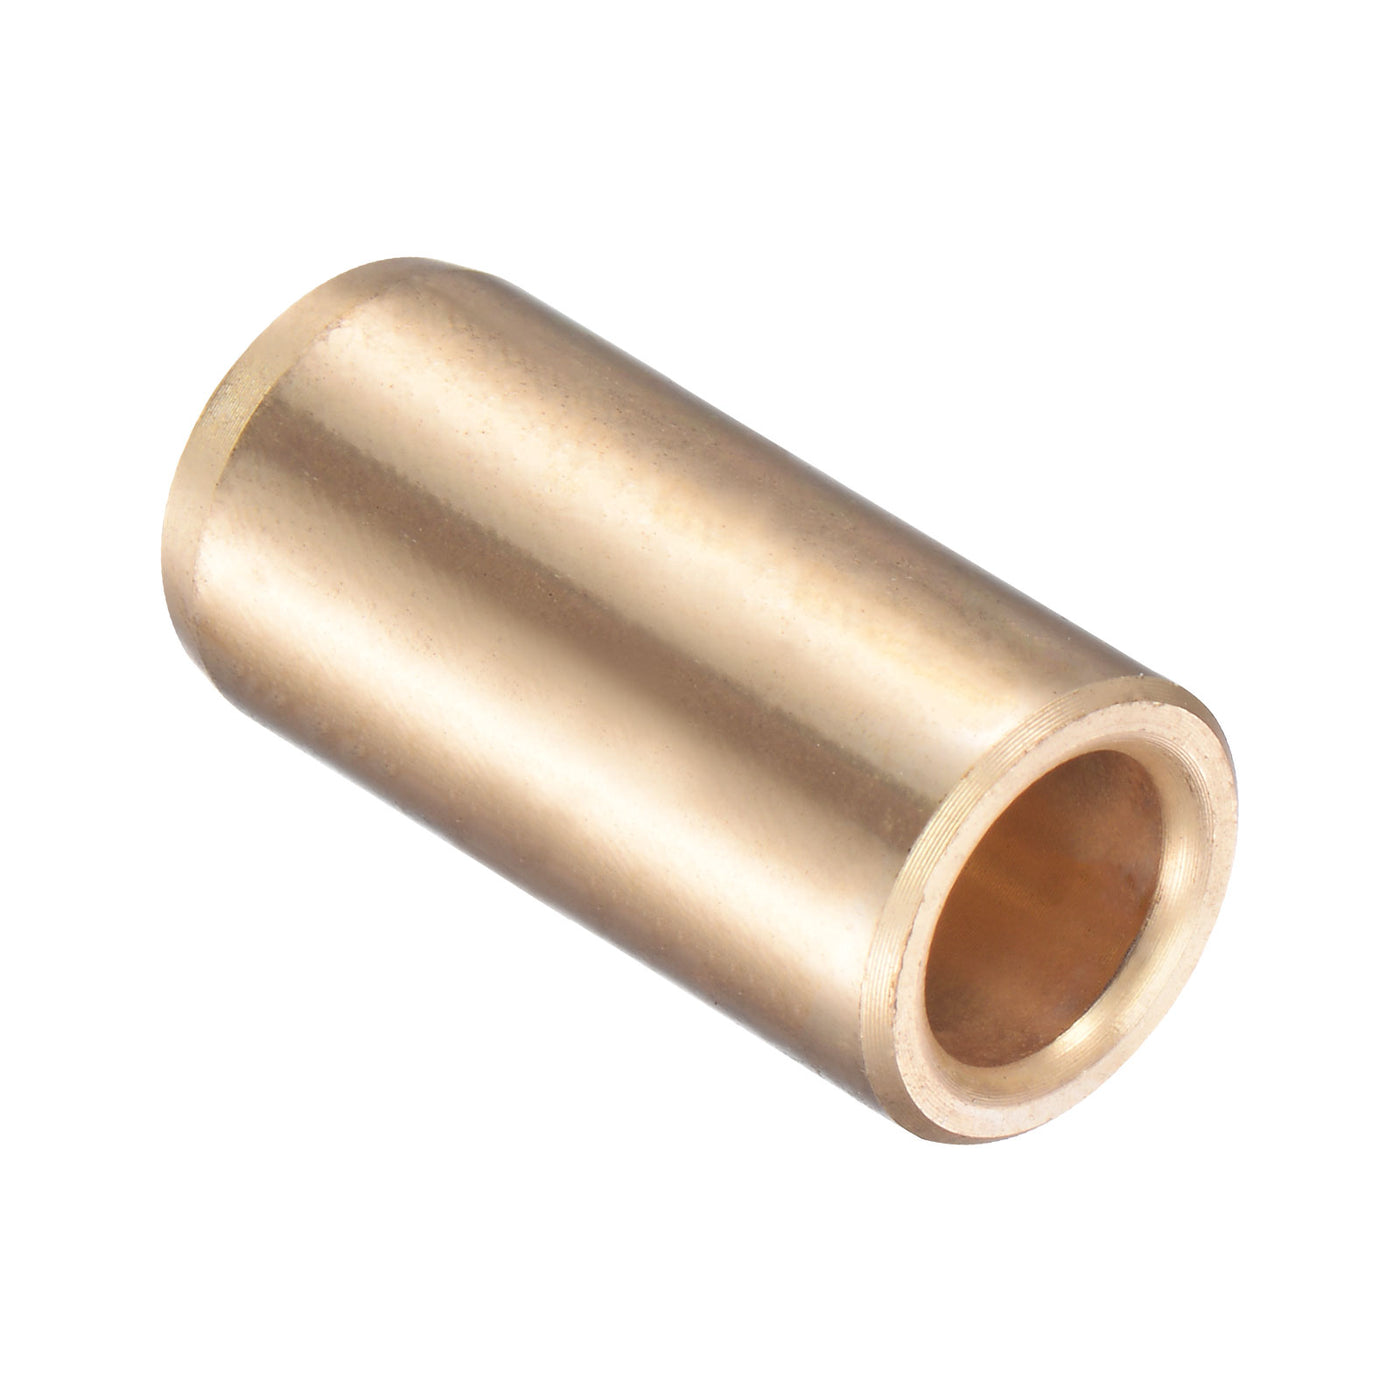 uxcell Uxcell Sleeve Bearings Cast Brass Self-Lubricating Bushings